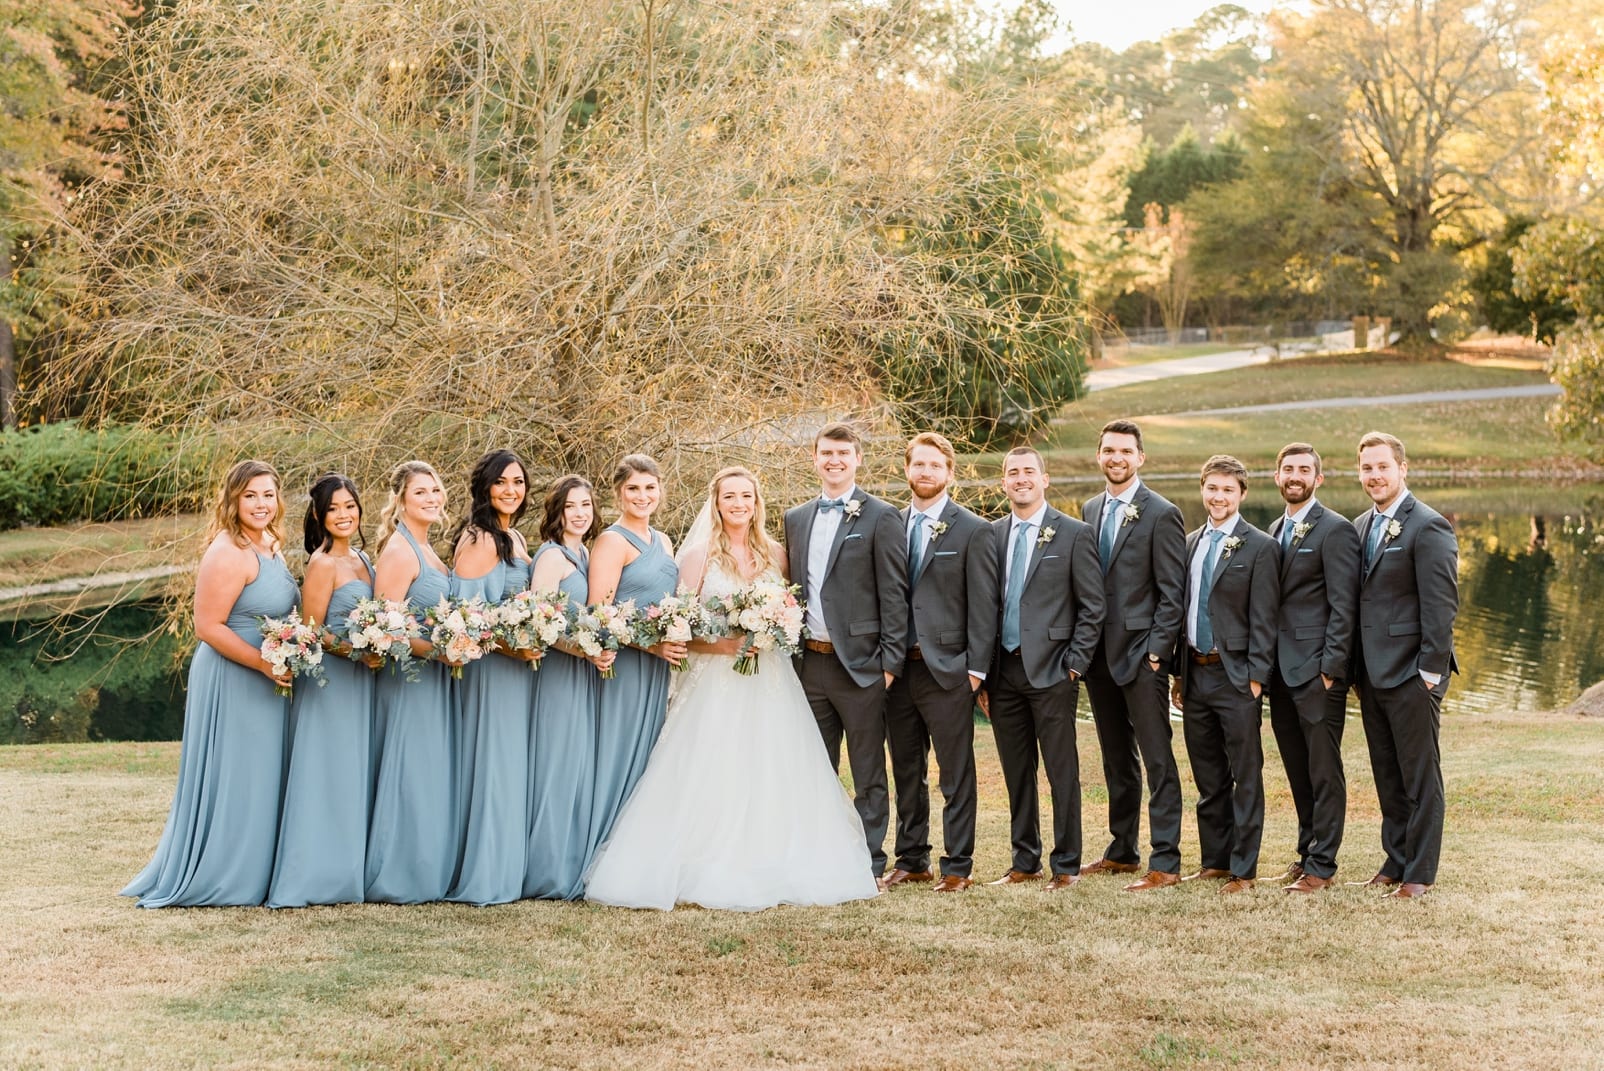 Raleigh wedding party in gray suits and long blue dresses with the bride and groom photo